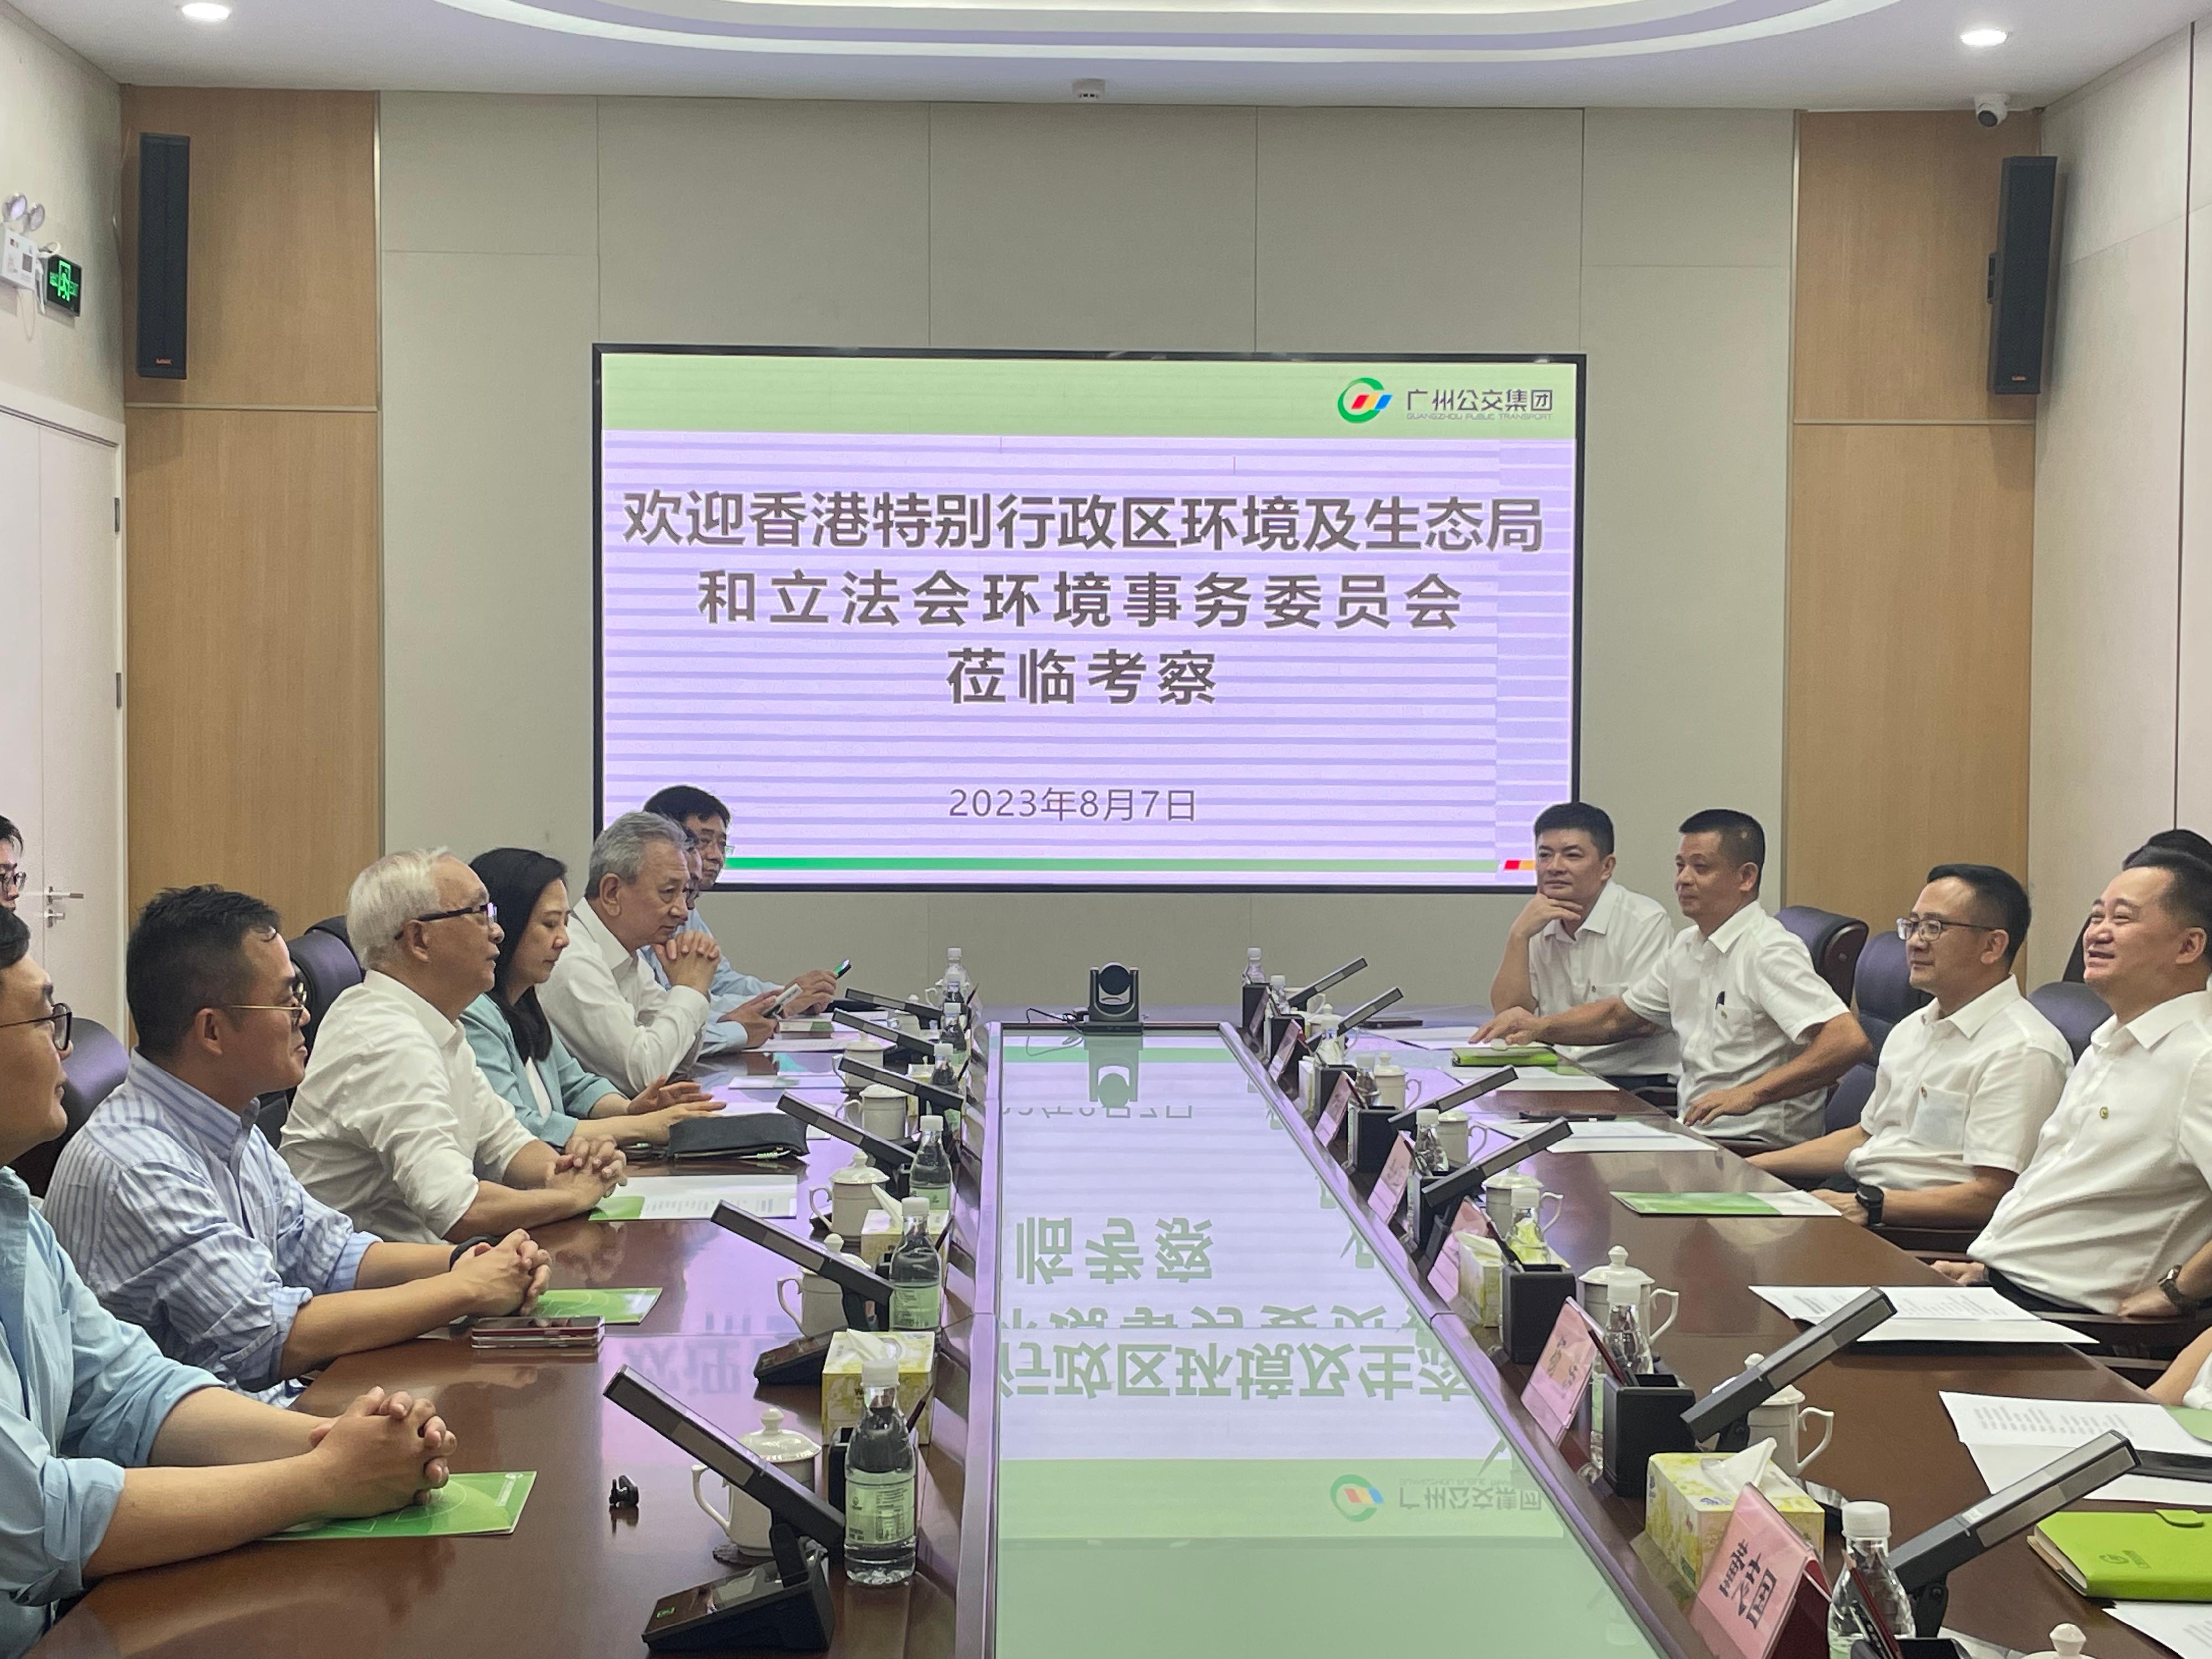 The Secretary for Environment and Ecology, Mr Tse Chin-wan, together with the Legislative Council Panel on Environmental Affairs, visited the Yanling new energy eco-industrial park and Guangzhou public transport command center of the Guangzhou Public Transport Group this afternoon (August 7). Photo shows Mr Tse (third left), and the delegation of the Legislative Council Panel on Environmental Affairs, meeting with representatives of the Guangzhou Public Transport Group.